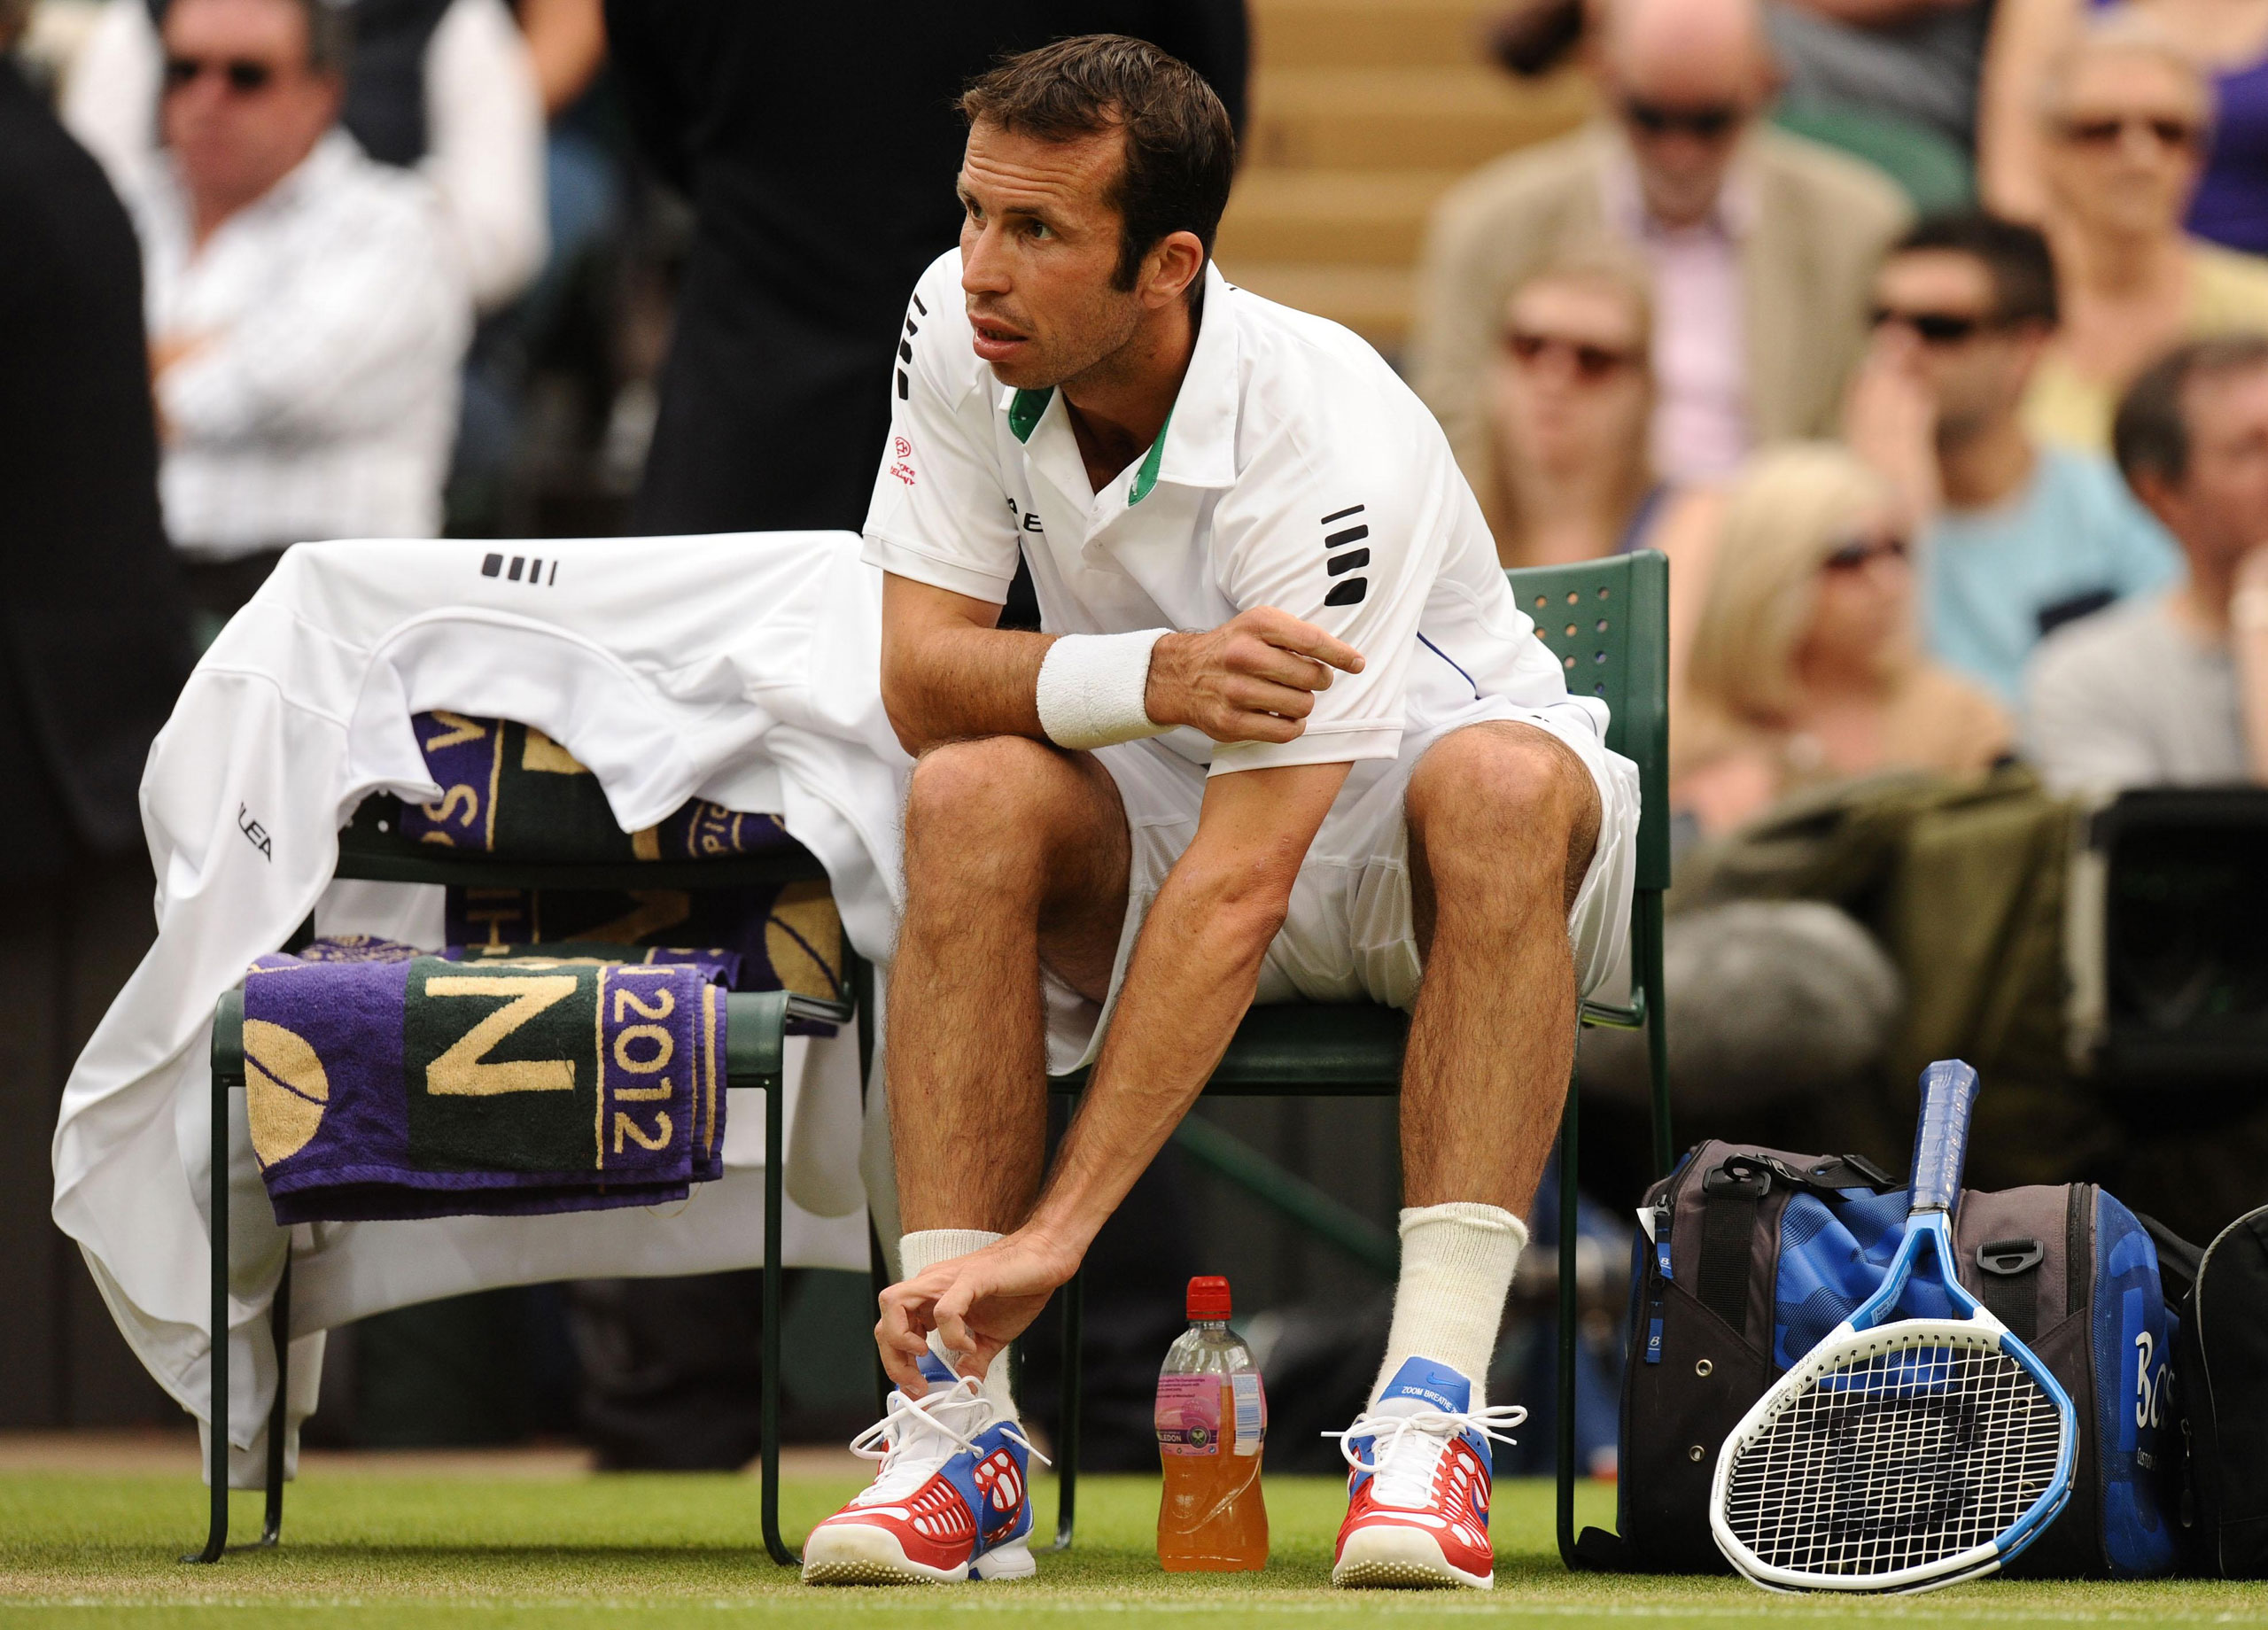 Radek Stepanek changes his sneakers before his match against Novak Djokovic at the 2012 Wimbledon Championships. The shoes were deemed too bright for the all-white dress code.